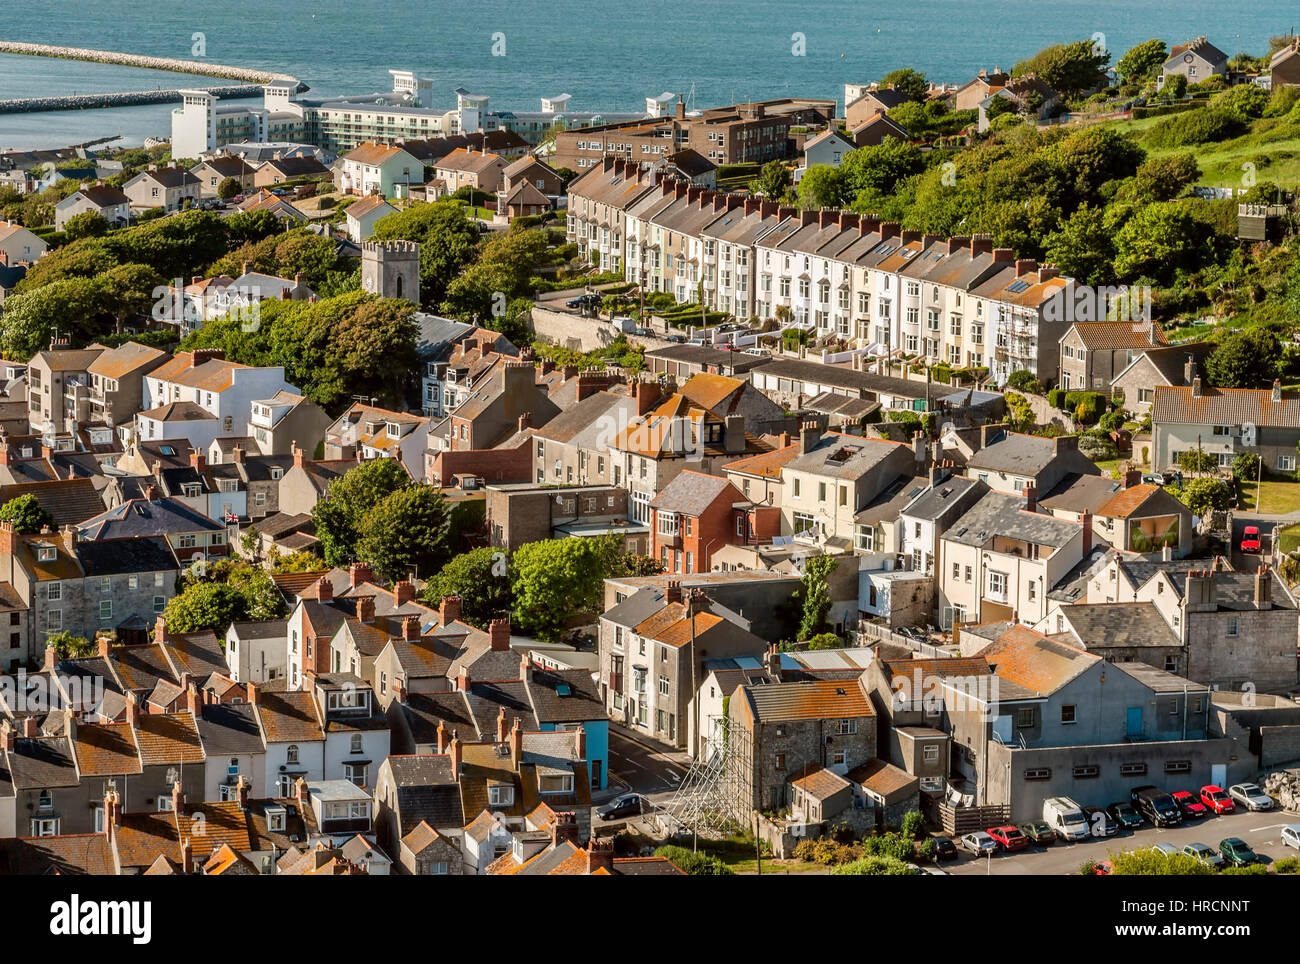 Town Fortuneswell on Isle of Portland at the English Channel coast, in the county of Dorset, England. Stock Photo